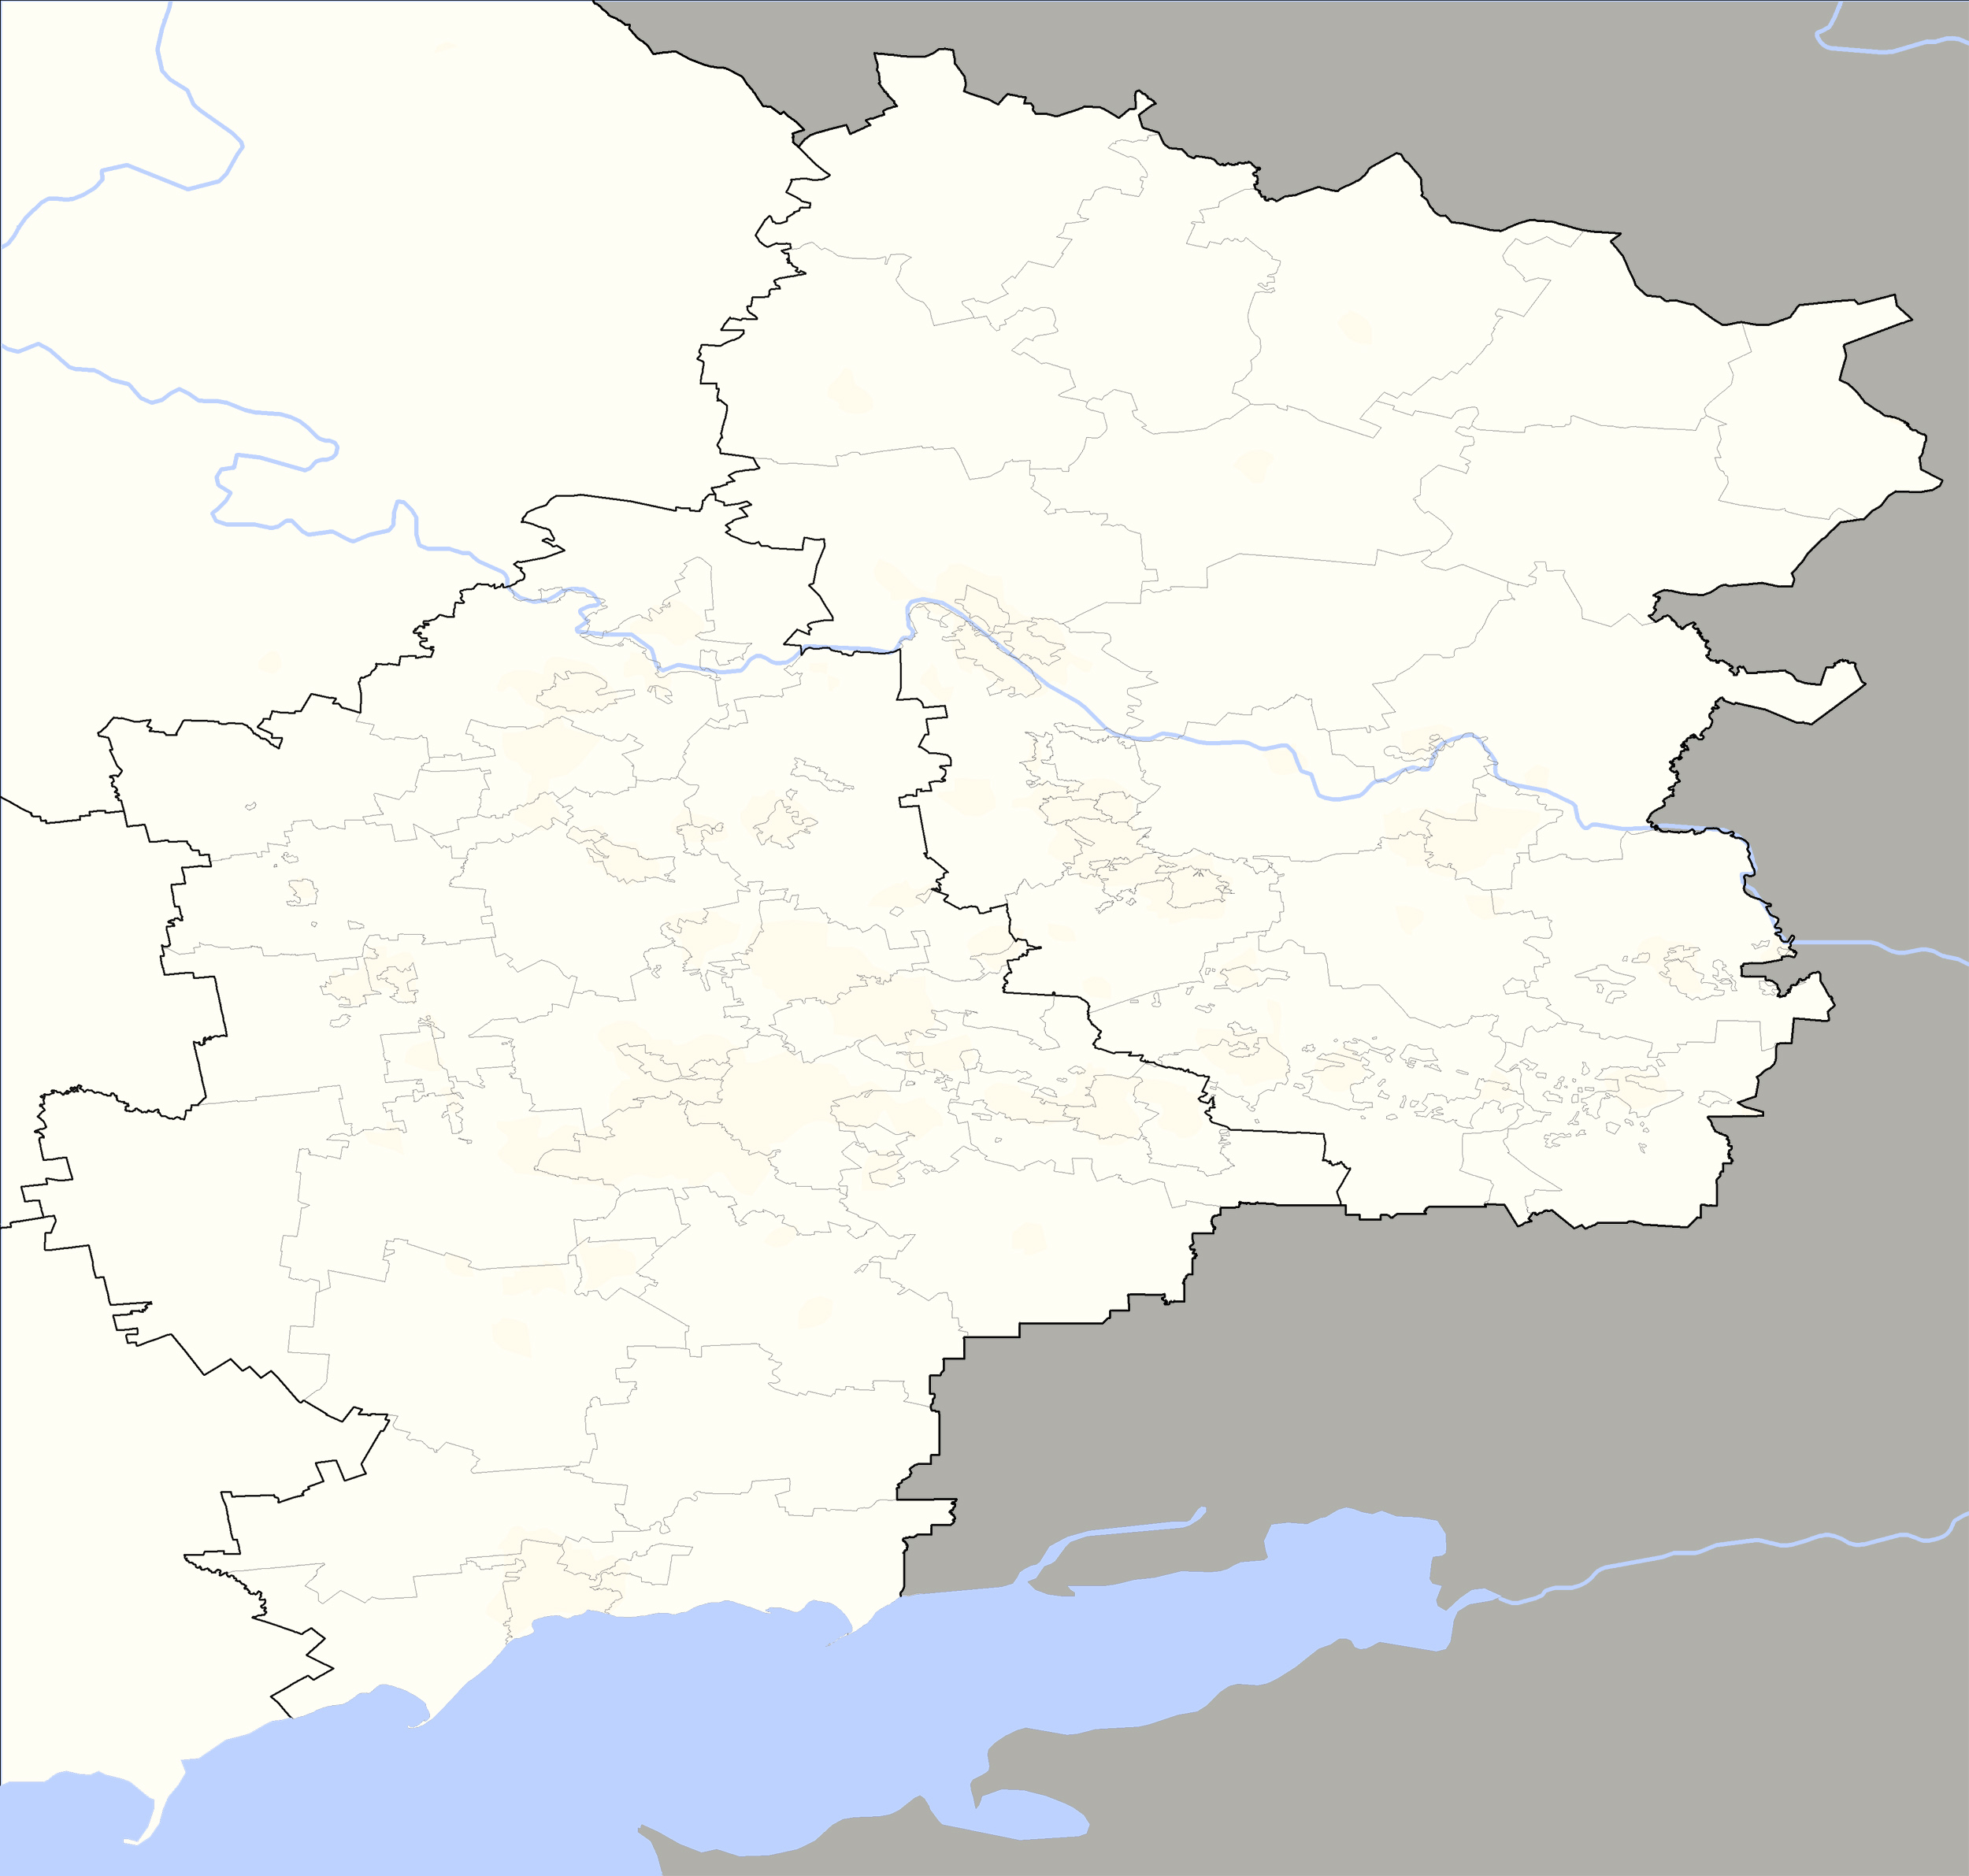 Nrg800/sandbox is located in Donbas